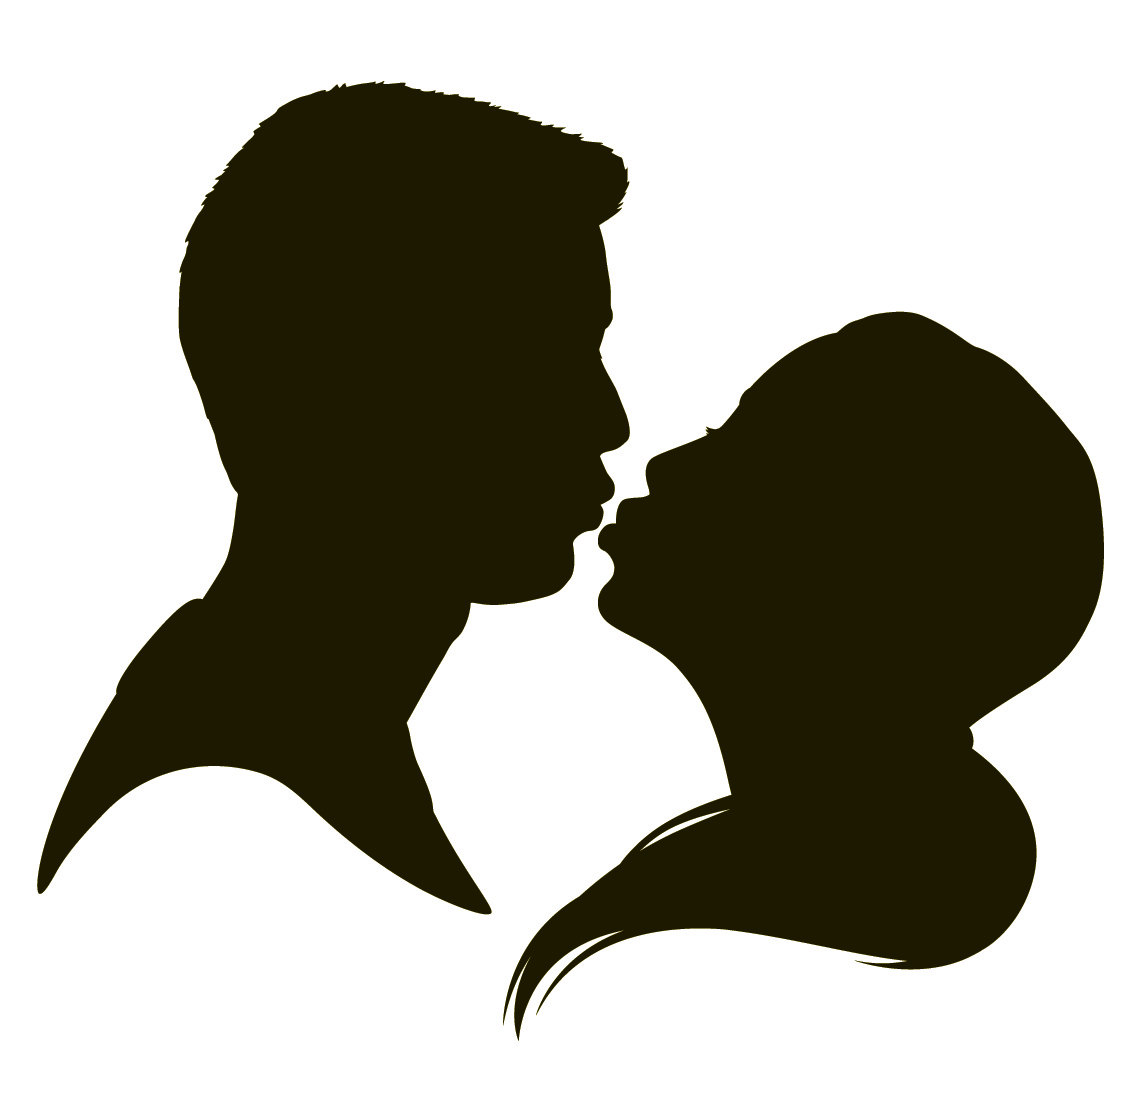 Silhouette Of Two People Kissing